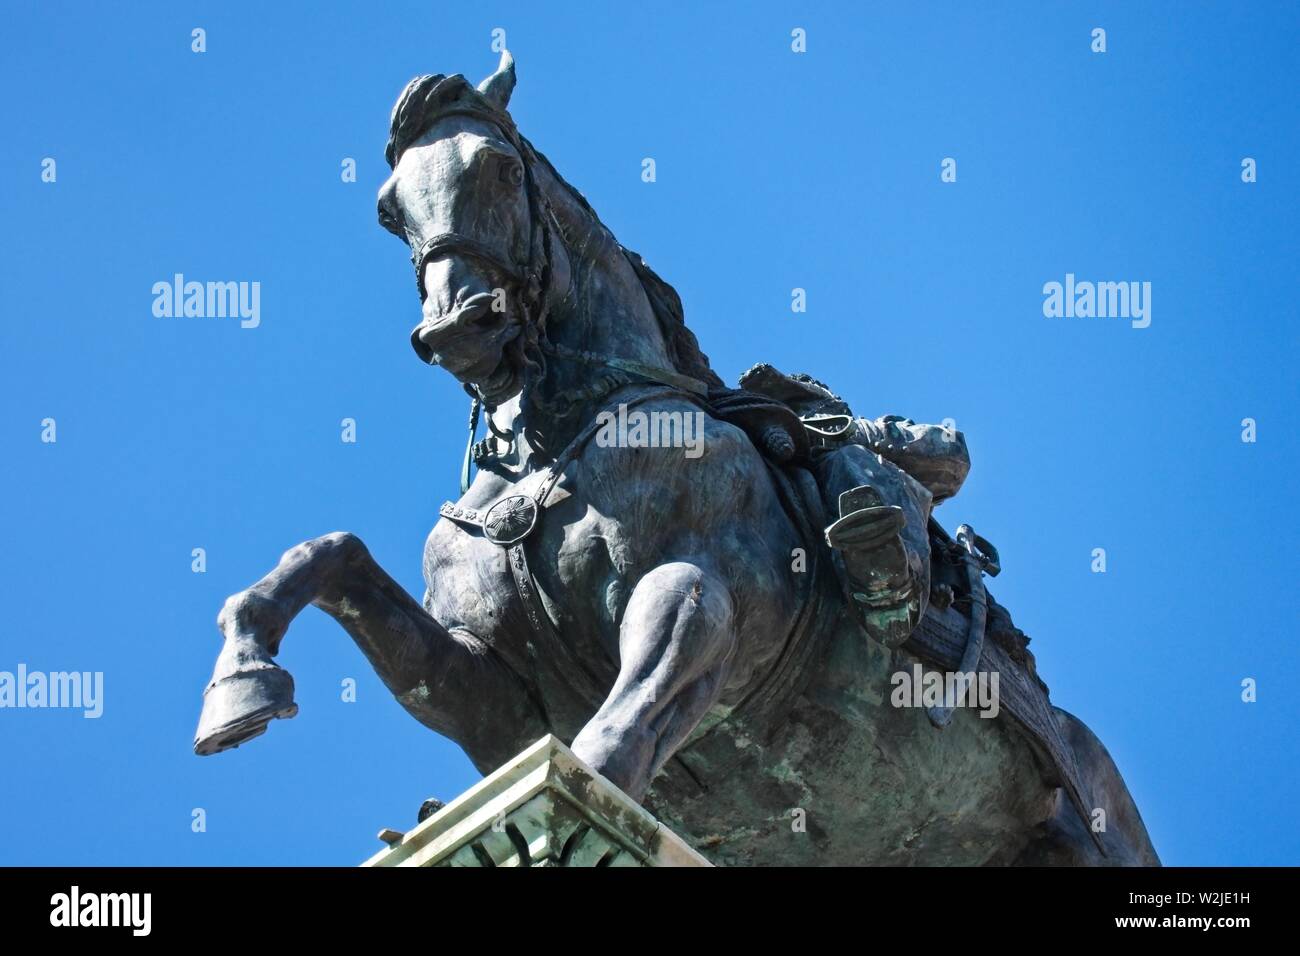 View from below of a bronze statue of a horse Stock Photo